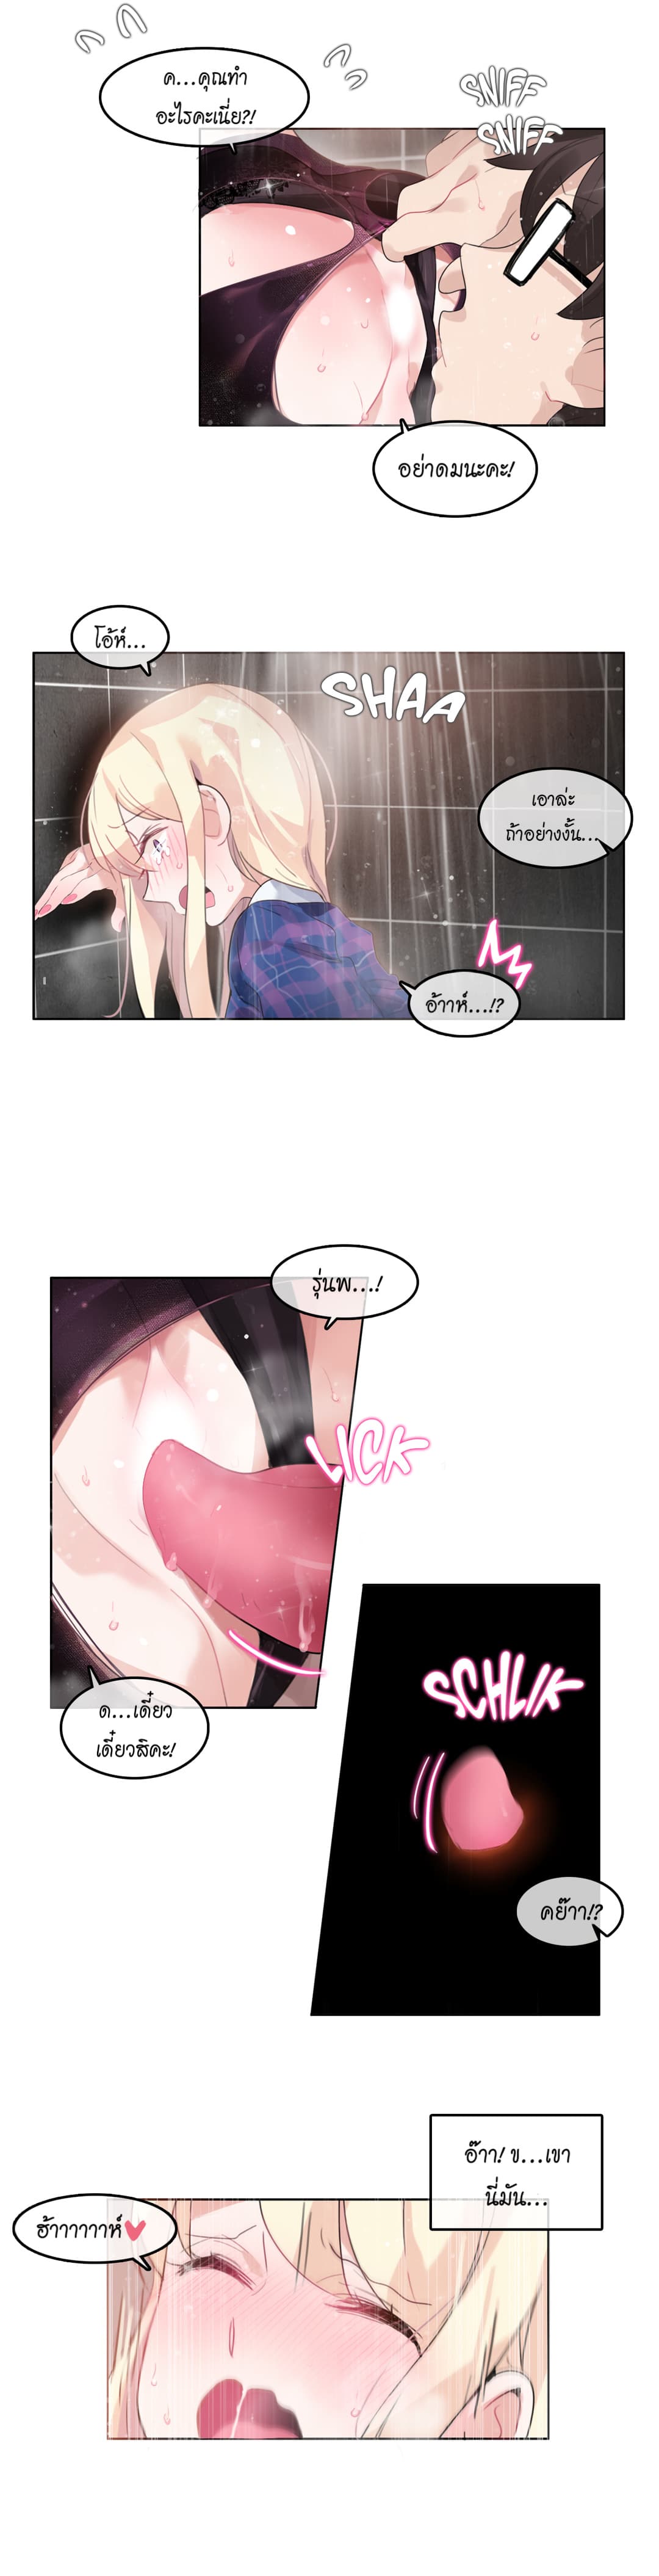 A Pervert’s Daily Life 44 (3)